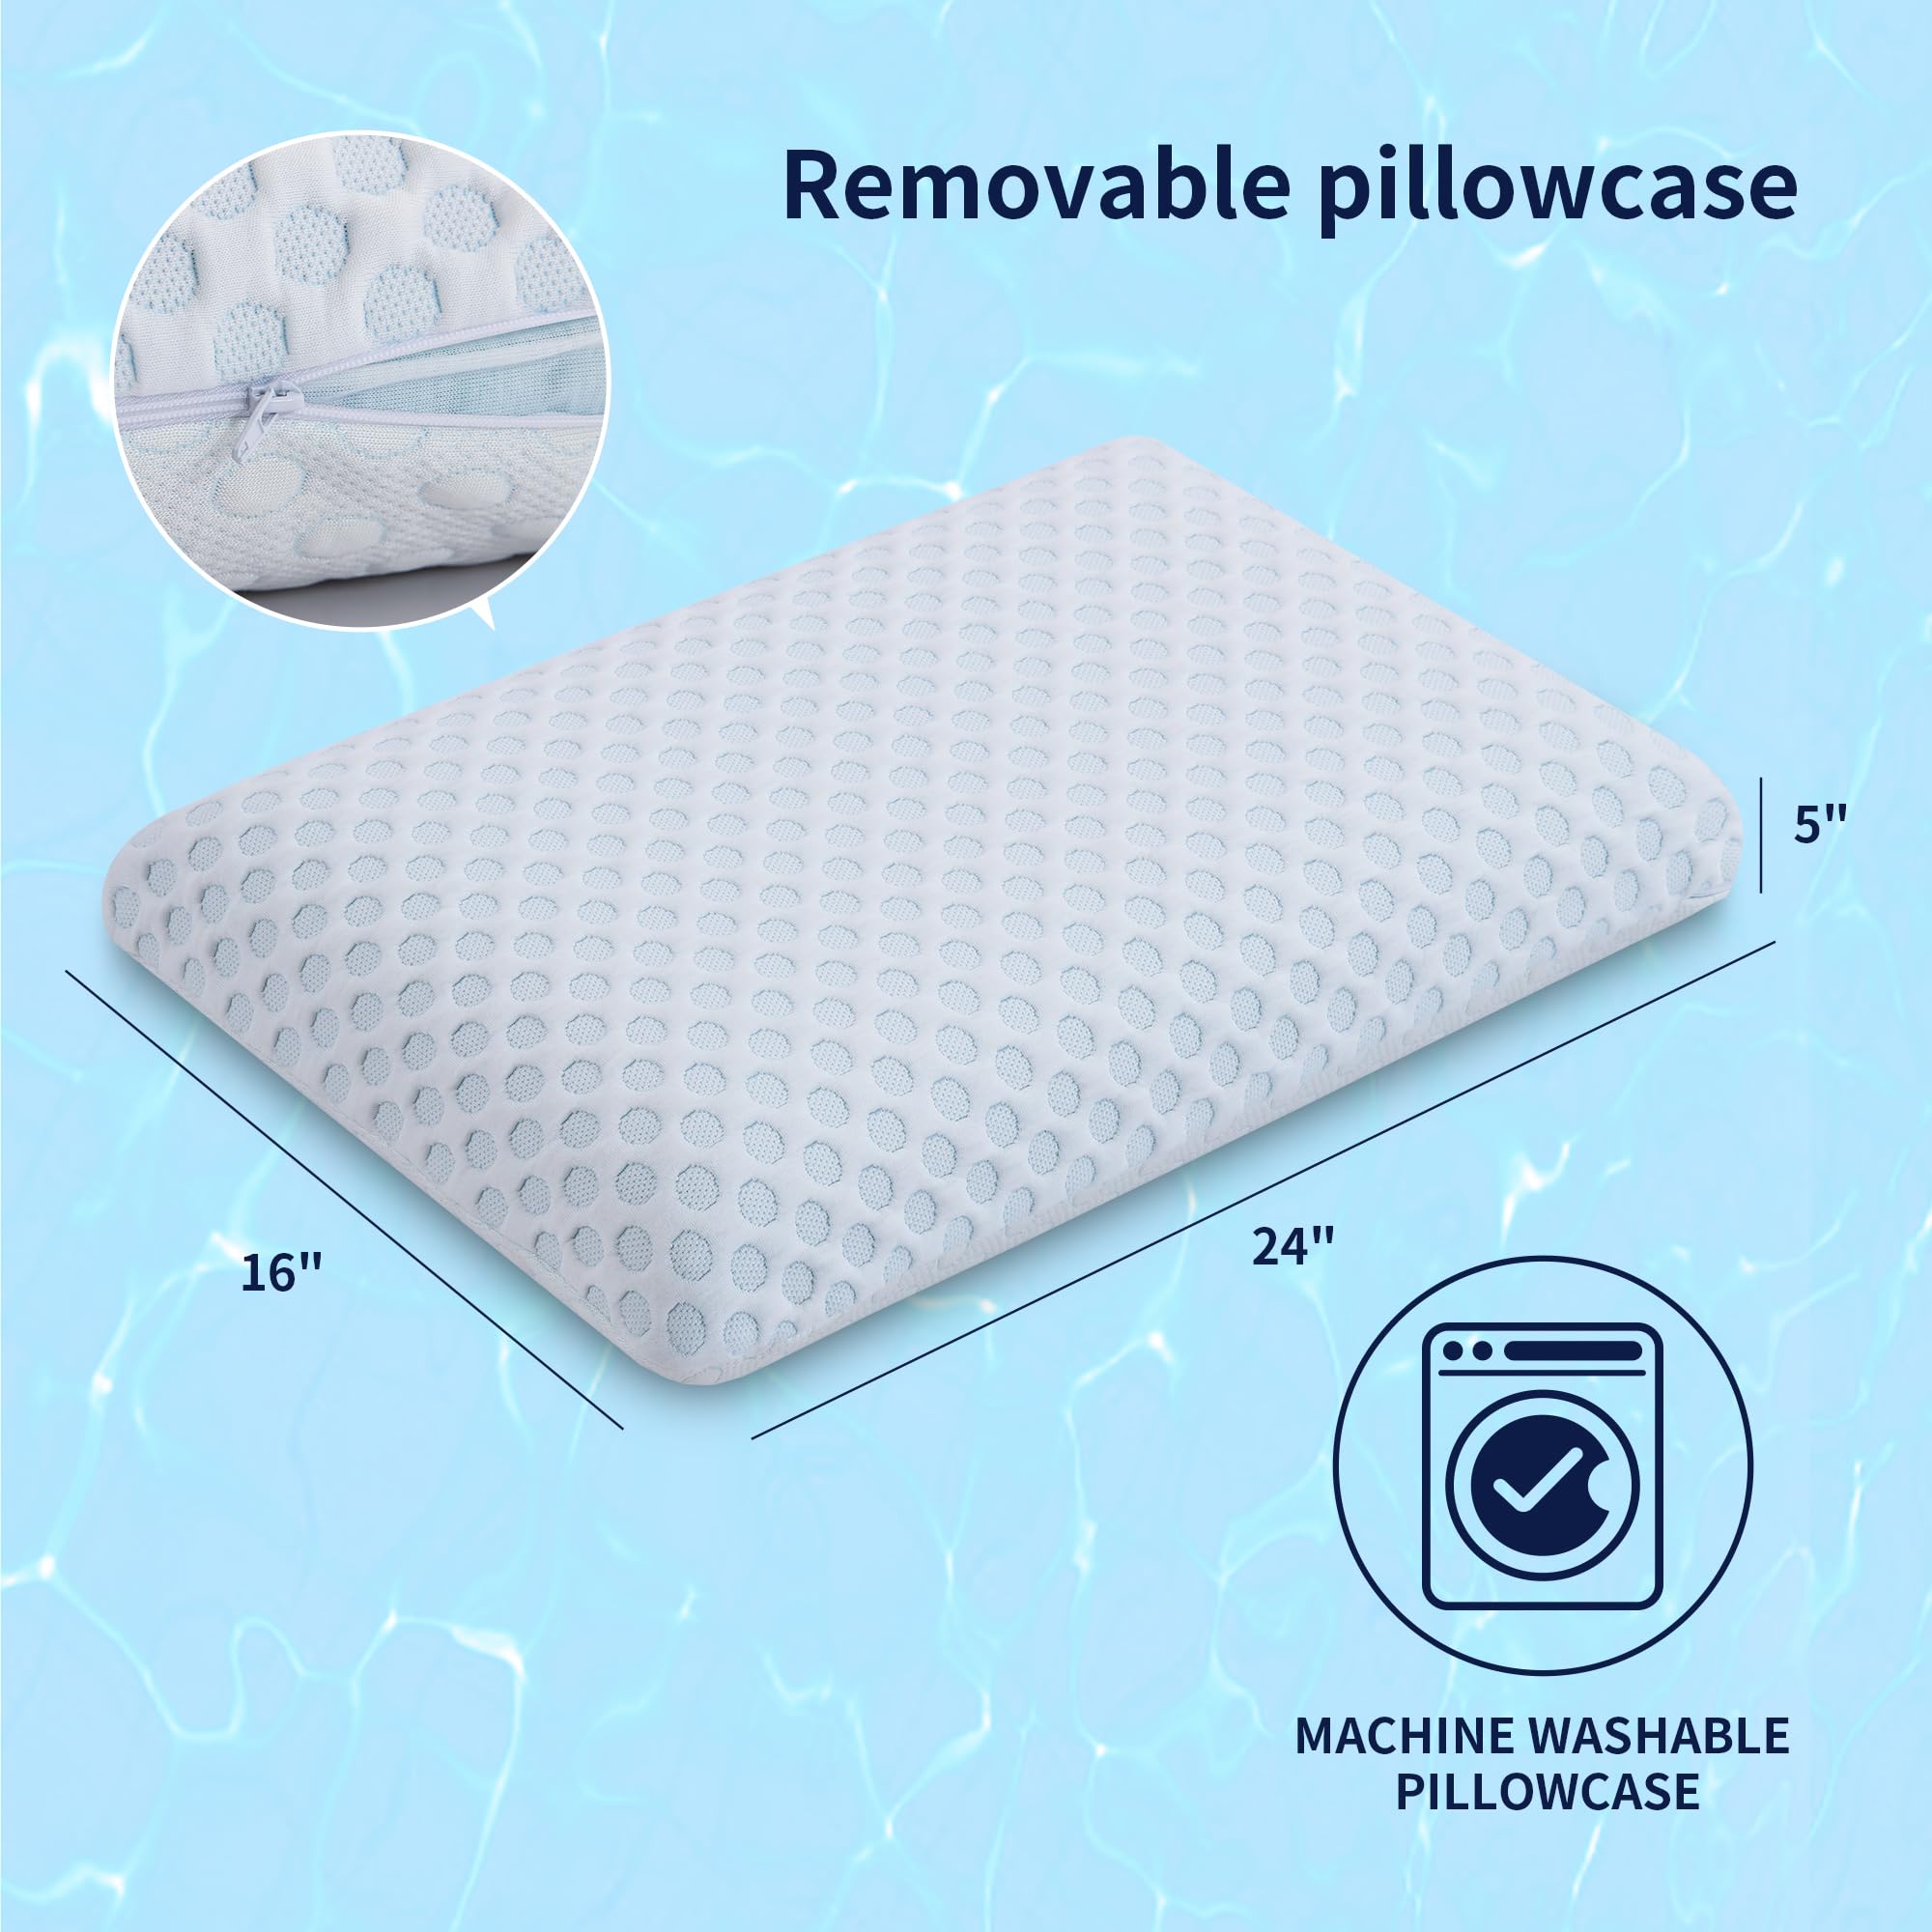 Hcore Gel Memory Foam Pillows 2 Pack Firm Pillow Dual-Sided Cooling & Cozy Washable Cover for All Seasons Ventilated Breathable Foam Pillow for Sleeping- CertiPUR-US - 2 Pack Standard